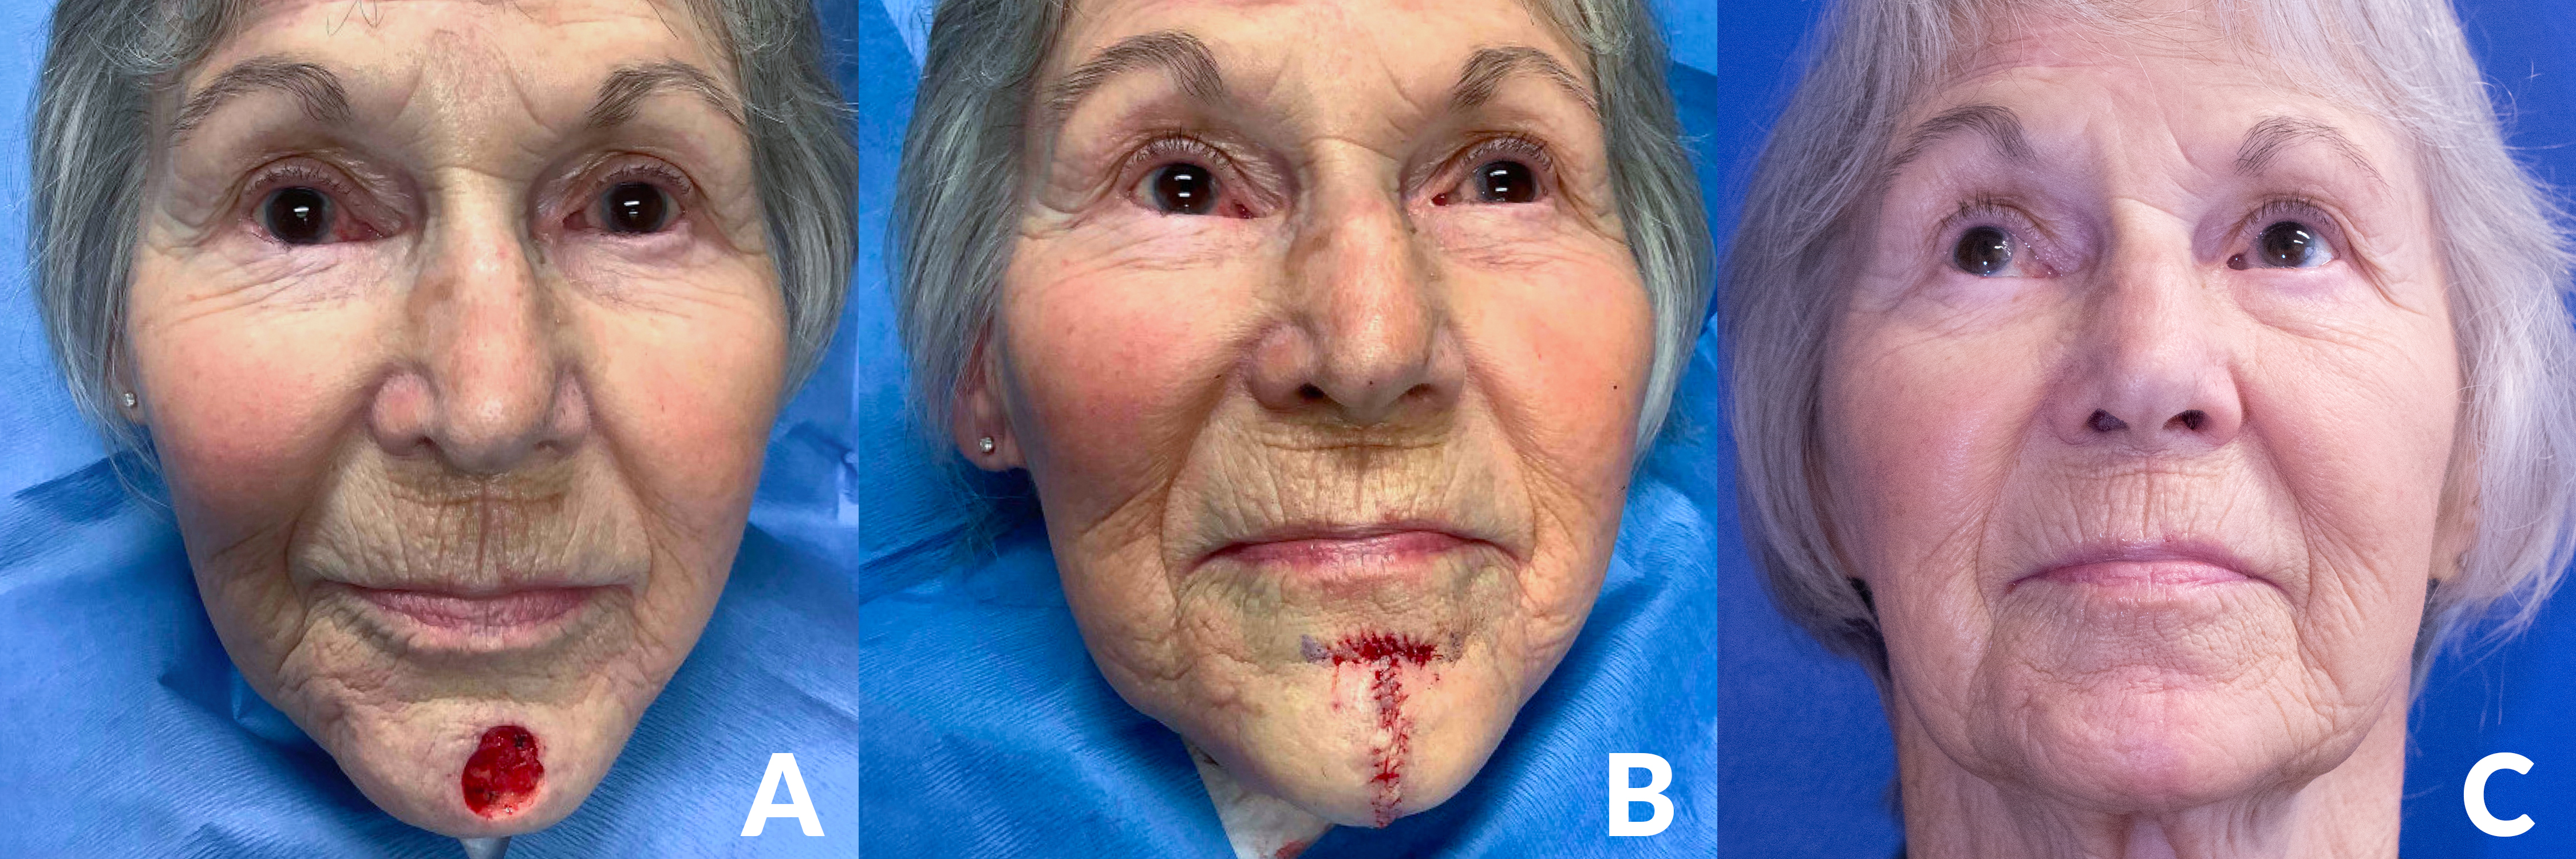 A surgical patient with three images, showing the progression of their skin cancer surgery and reconstruction